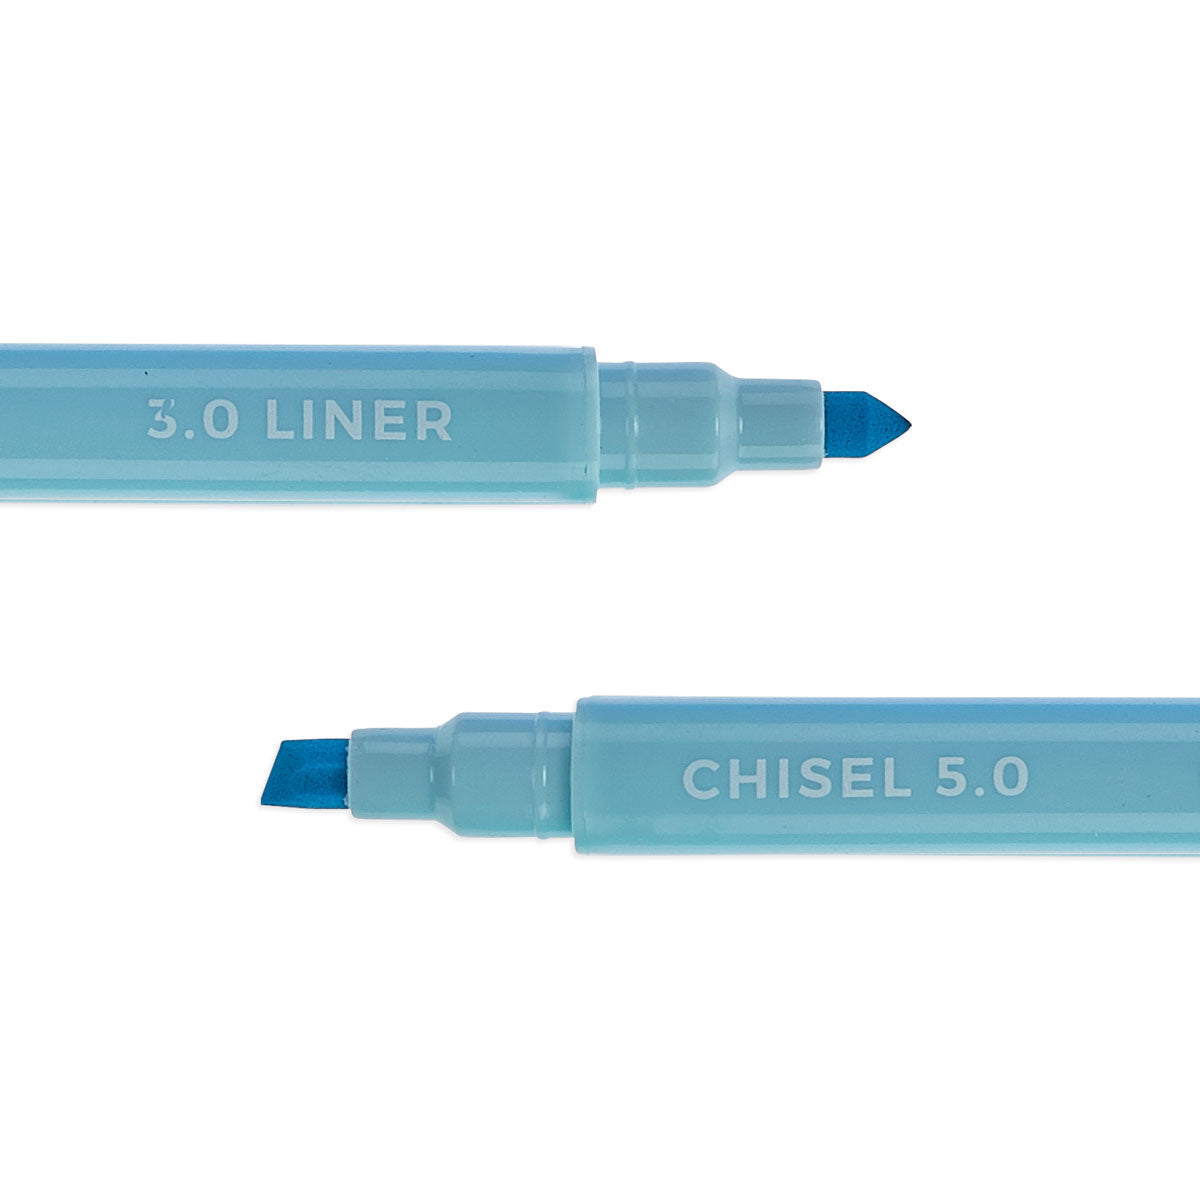 Pastel Liners Double-Ended Markers (Set of 8)